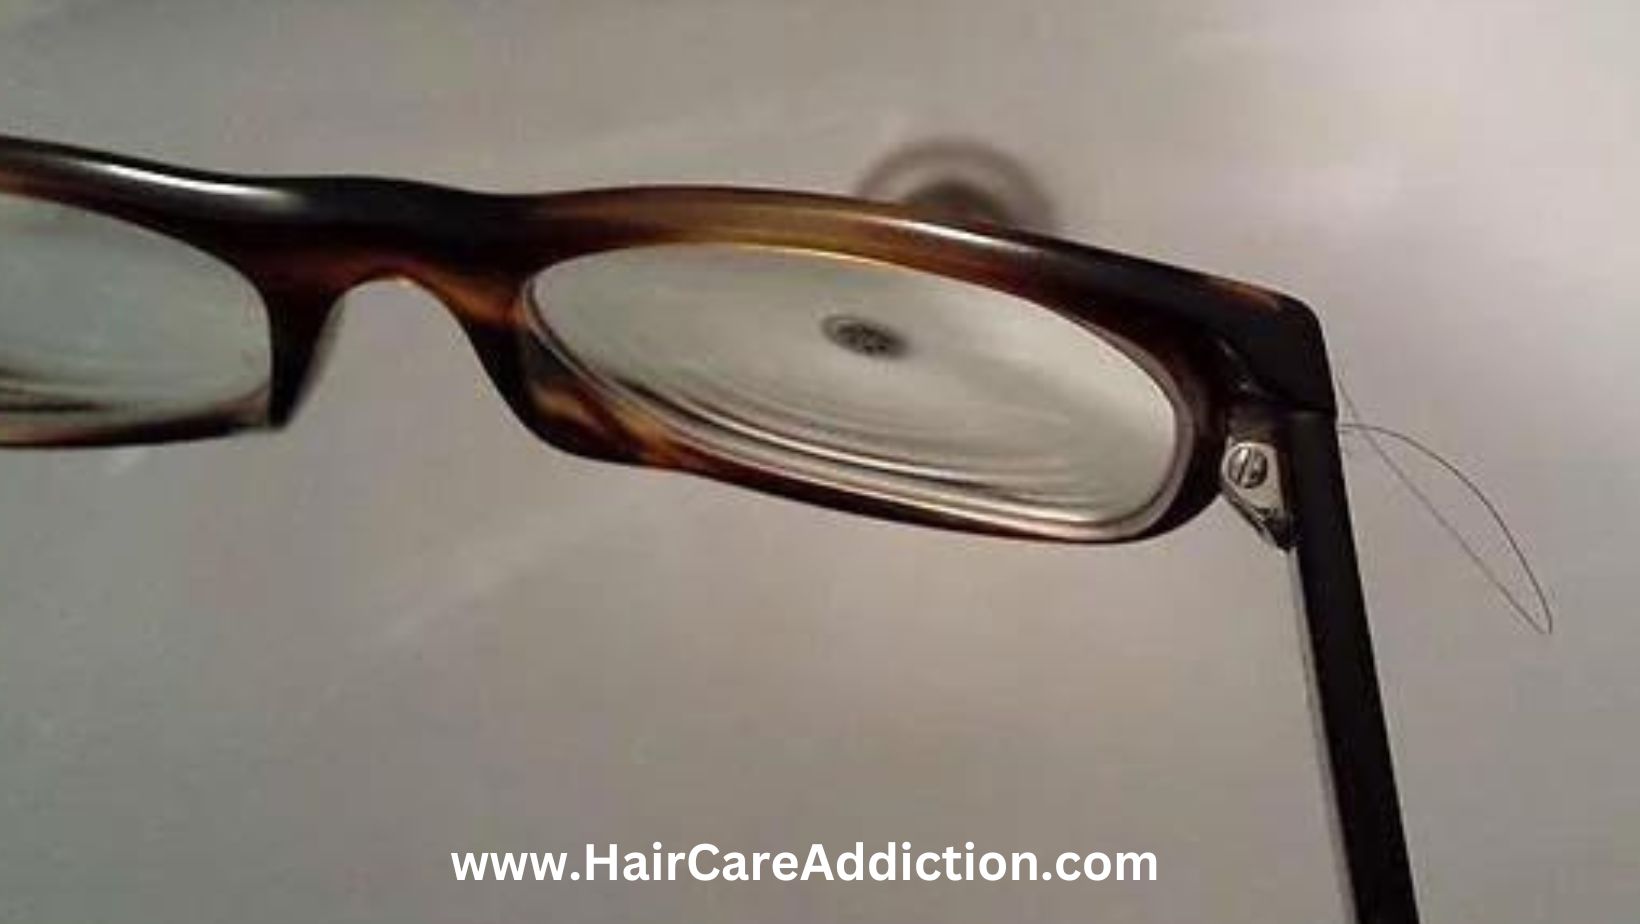 How to Stop Hair Getting Caught in sunglasses